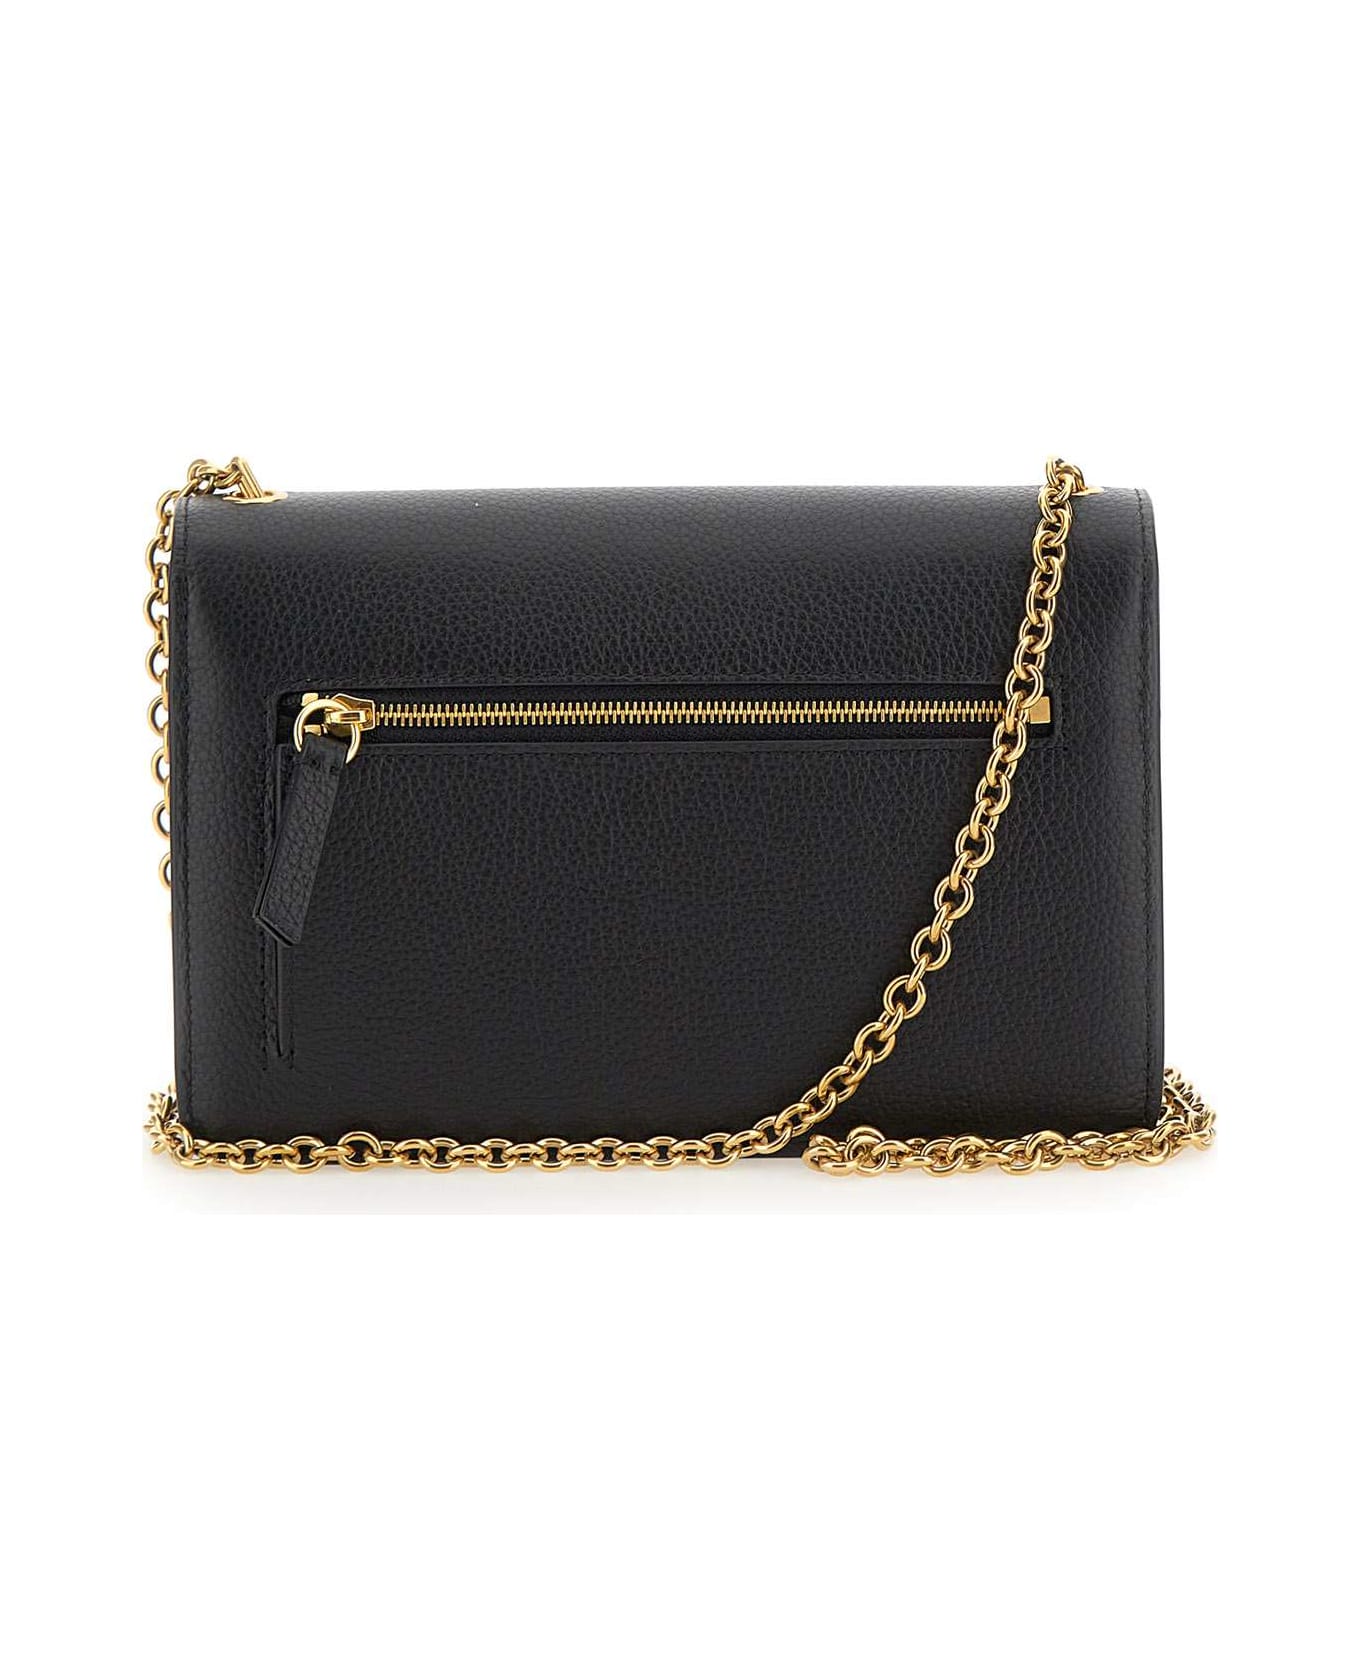 Mulberry 'small Darley' Leather Bag - Black ショルダーバッグ